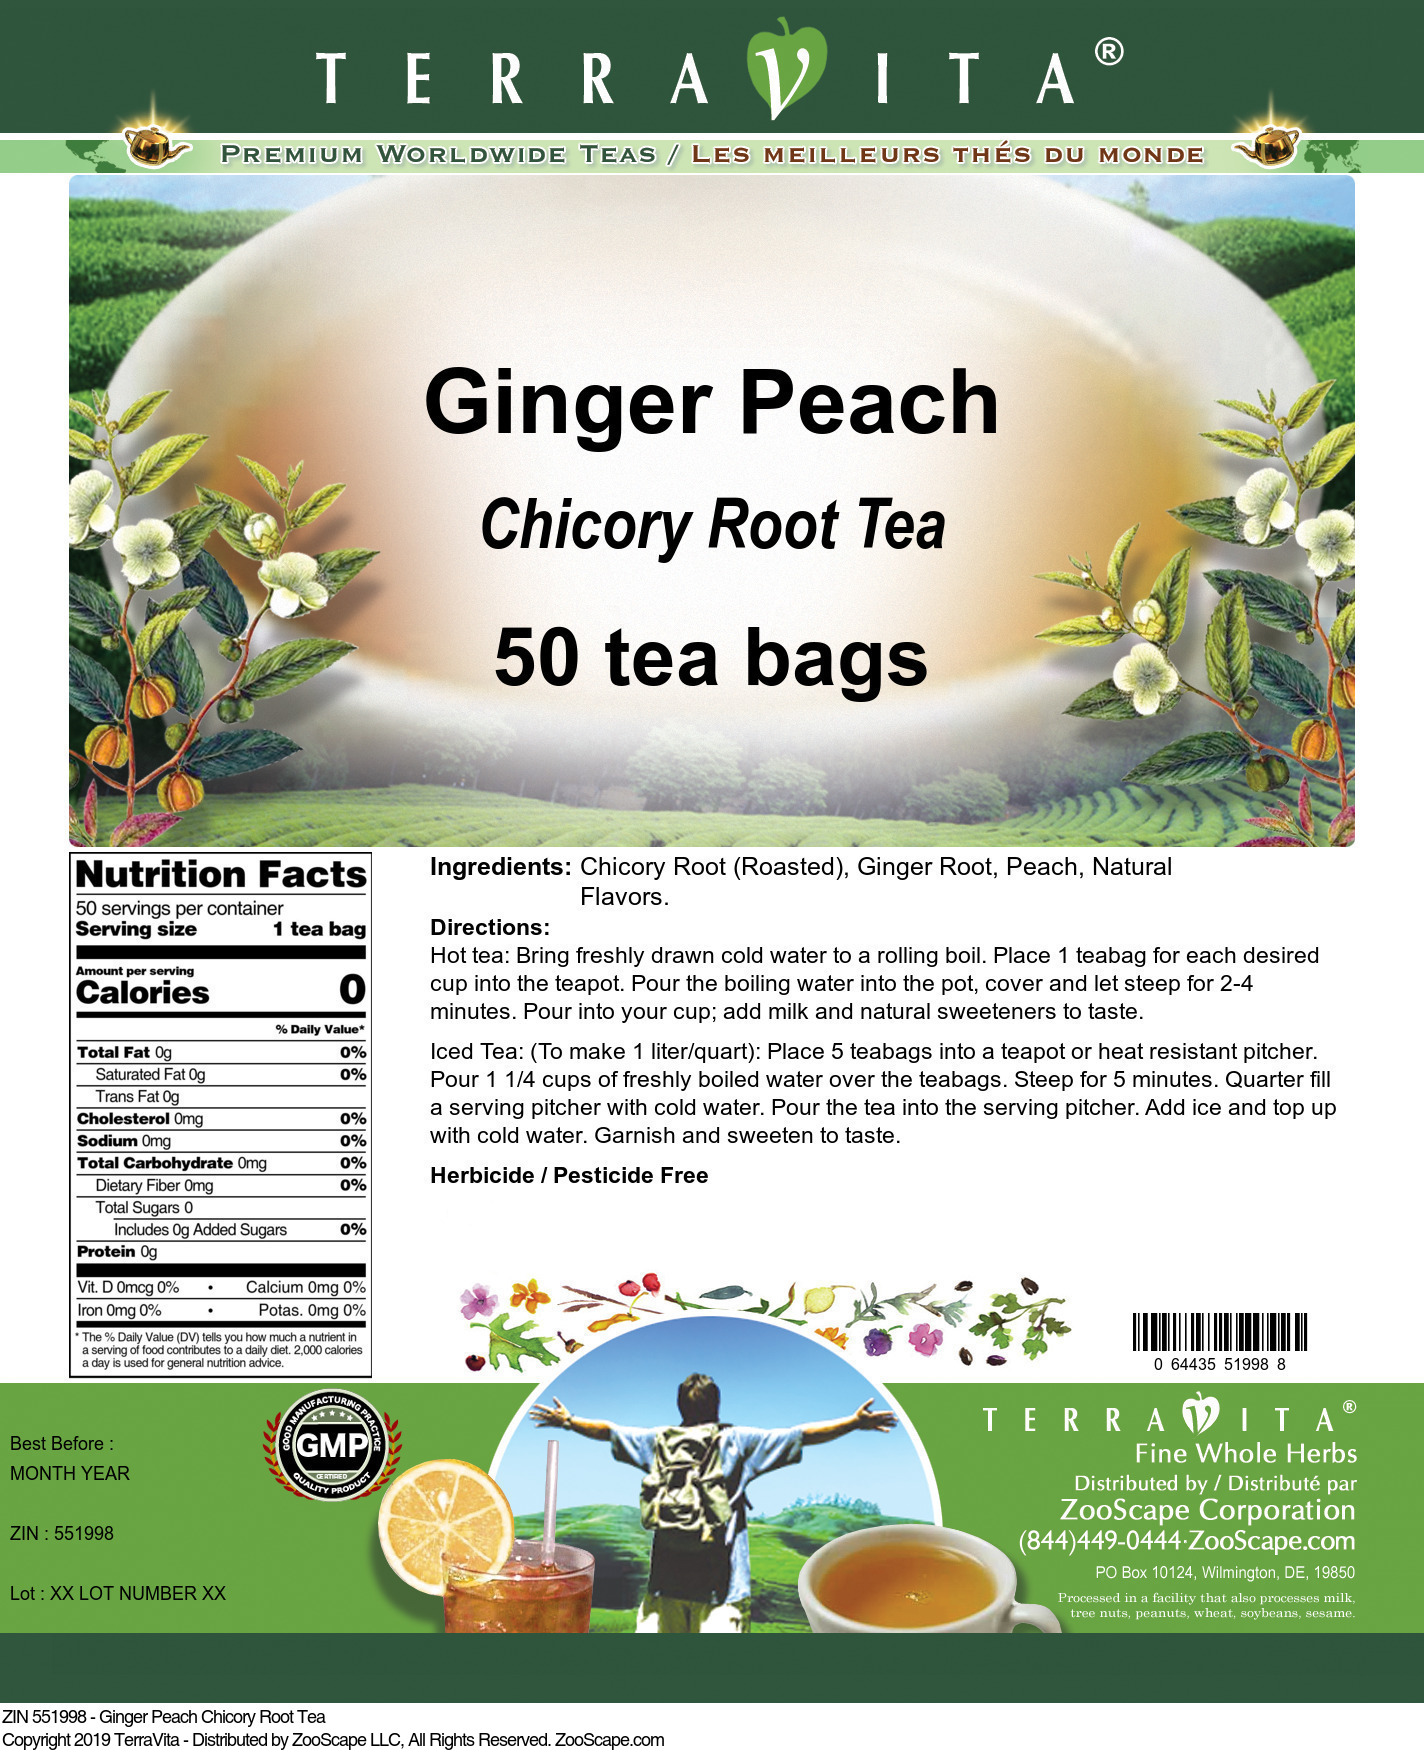 Ginger Peach Chicory Root Tea - Label